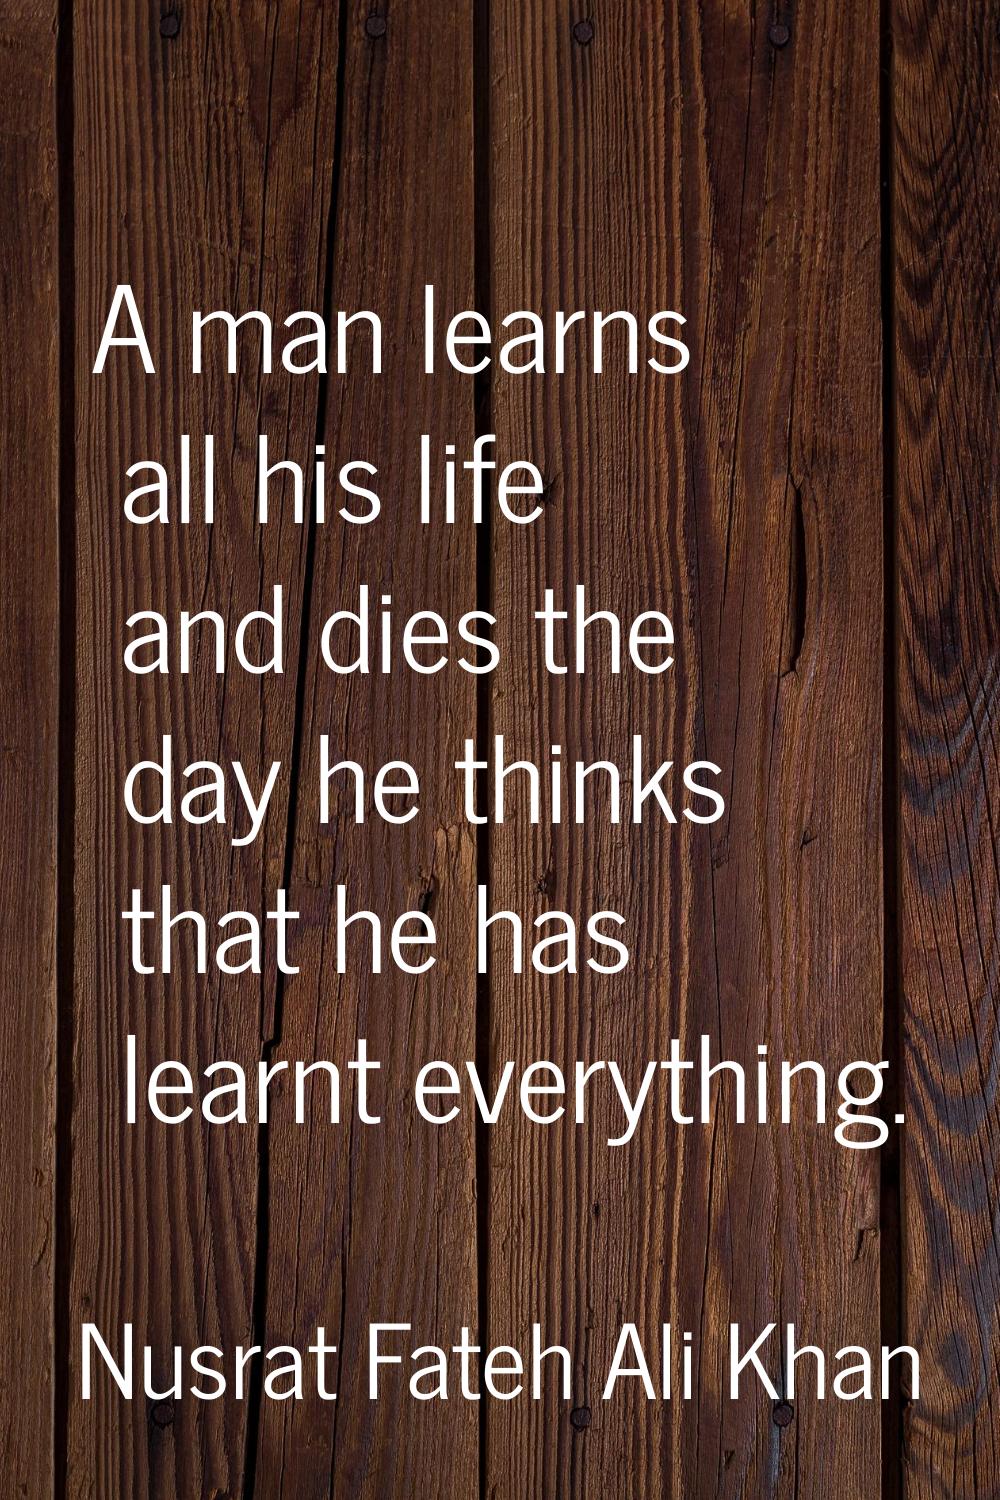 A man learns all his life and dies the day he thinks that he has learnt everything.